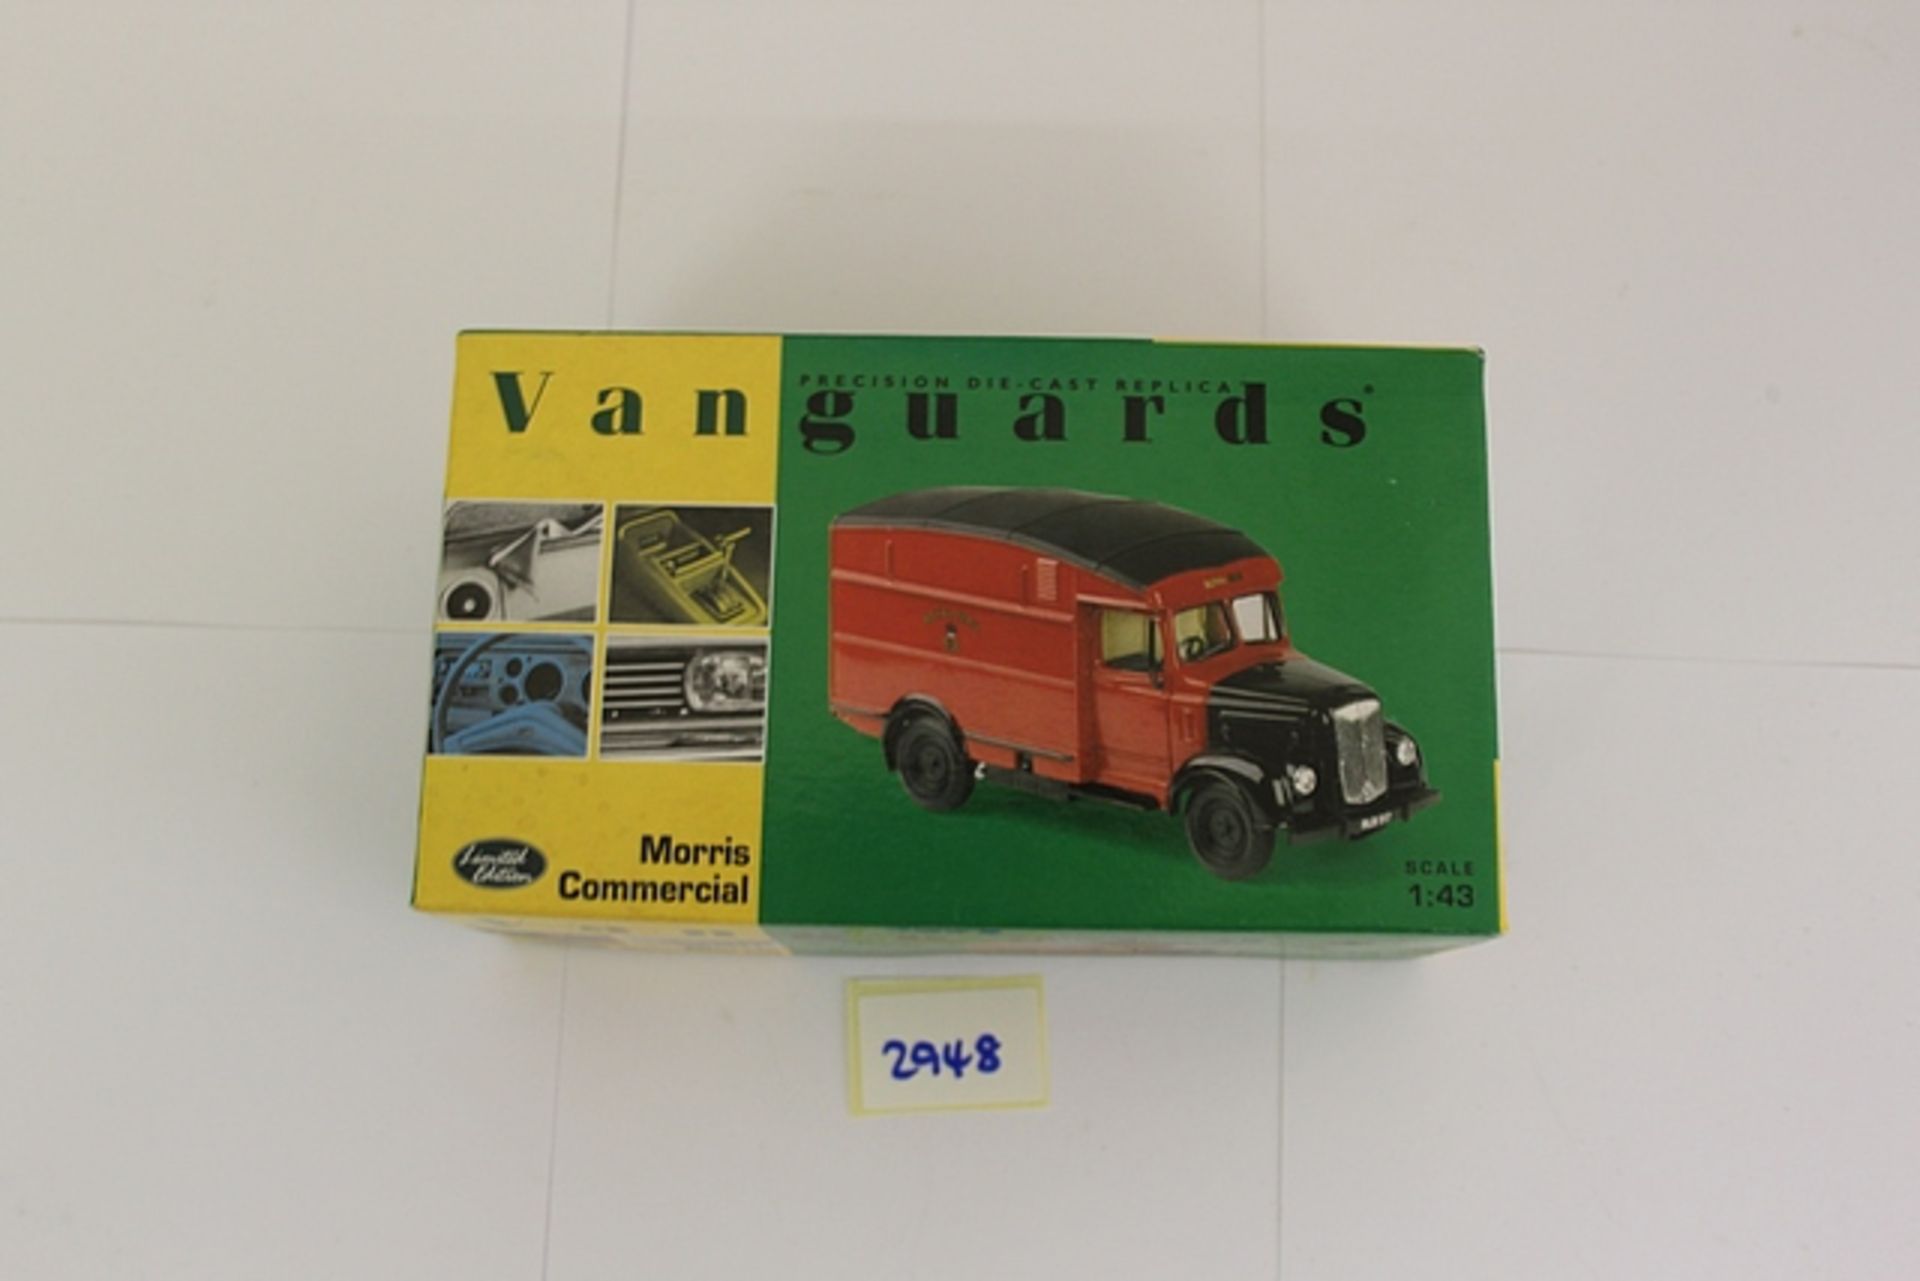 Vanguards #VA07501 Diecast Royal Mail Morris Commercial Van Scale 1/43 Complete With Box